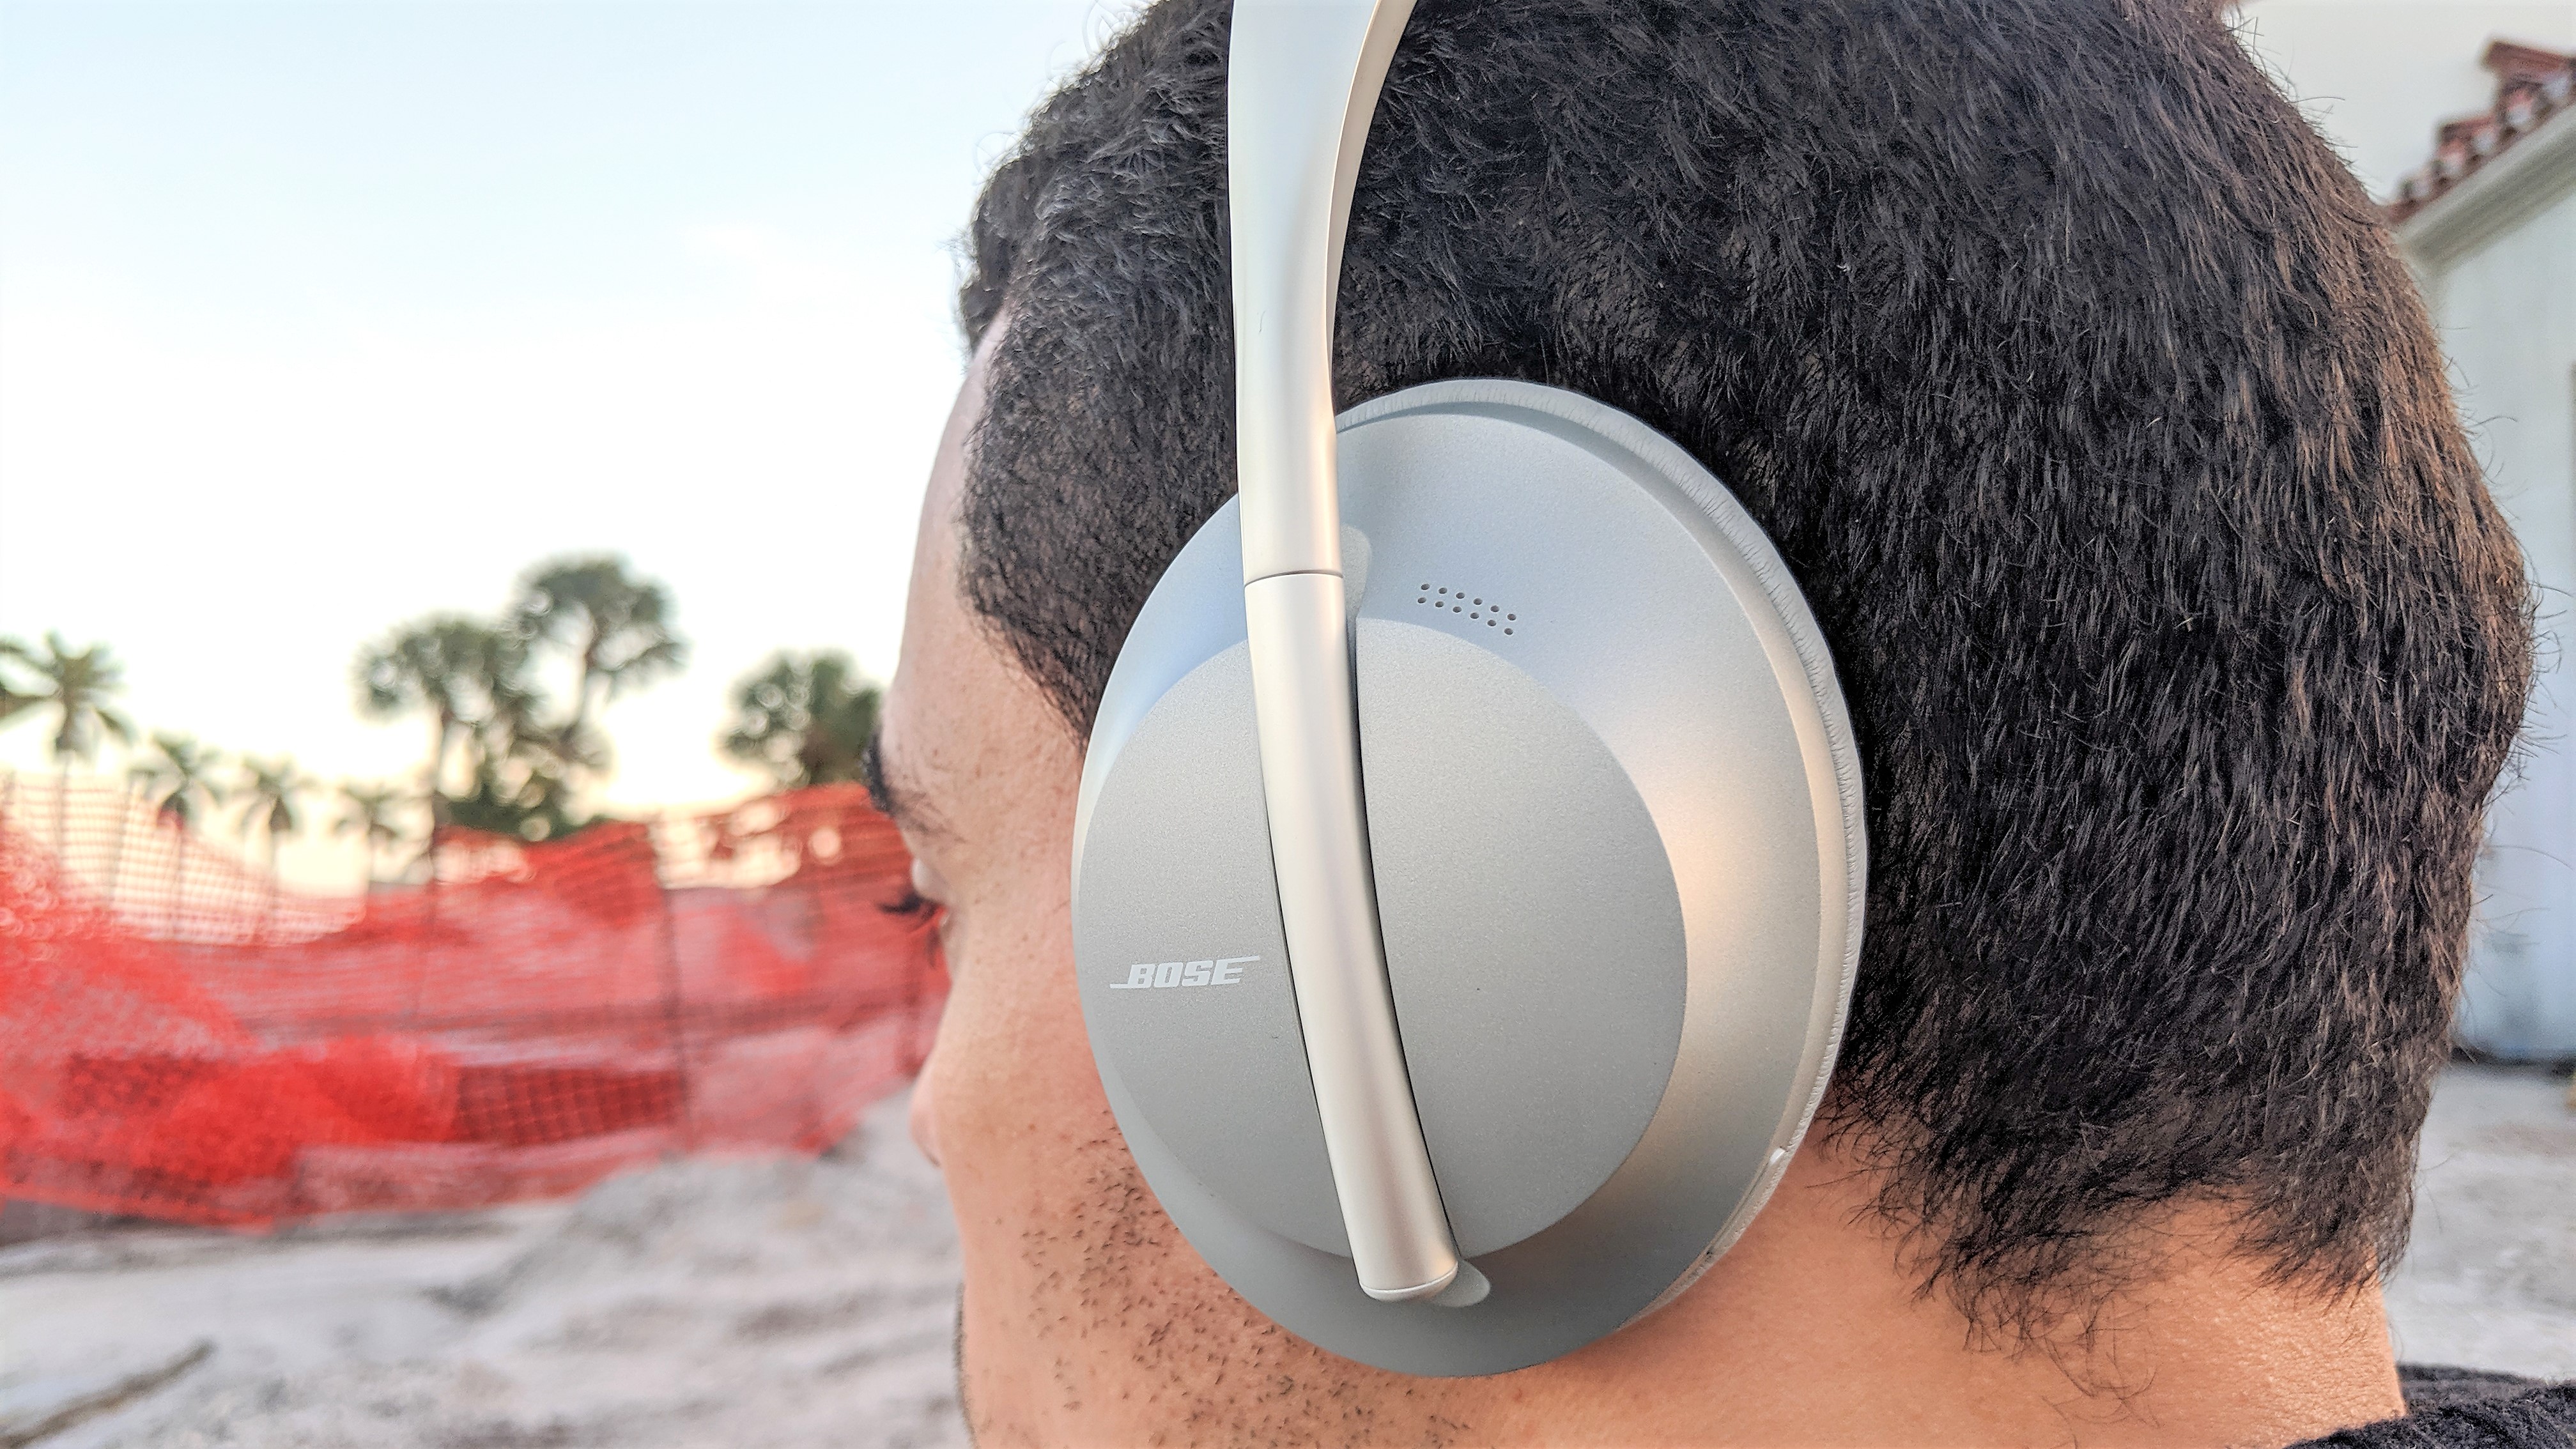 Bose 700 worn by reviewer testing ANC outside